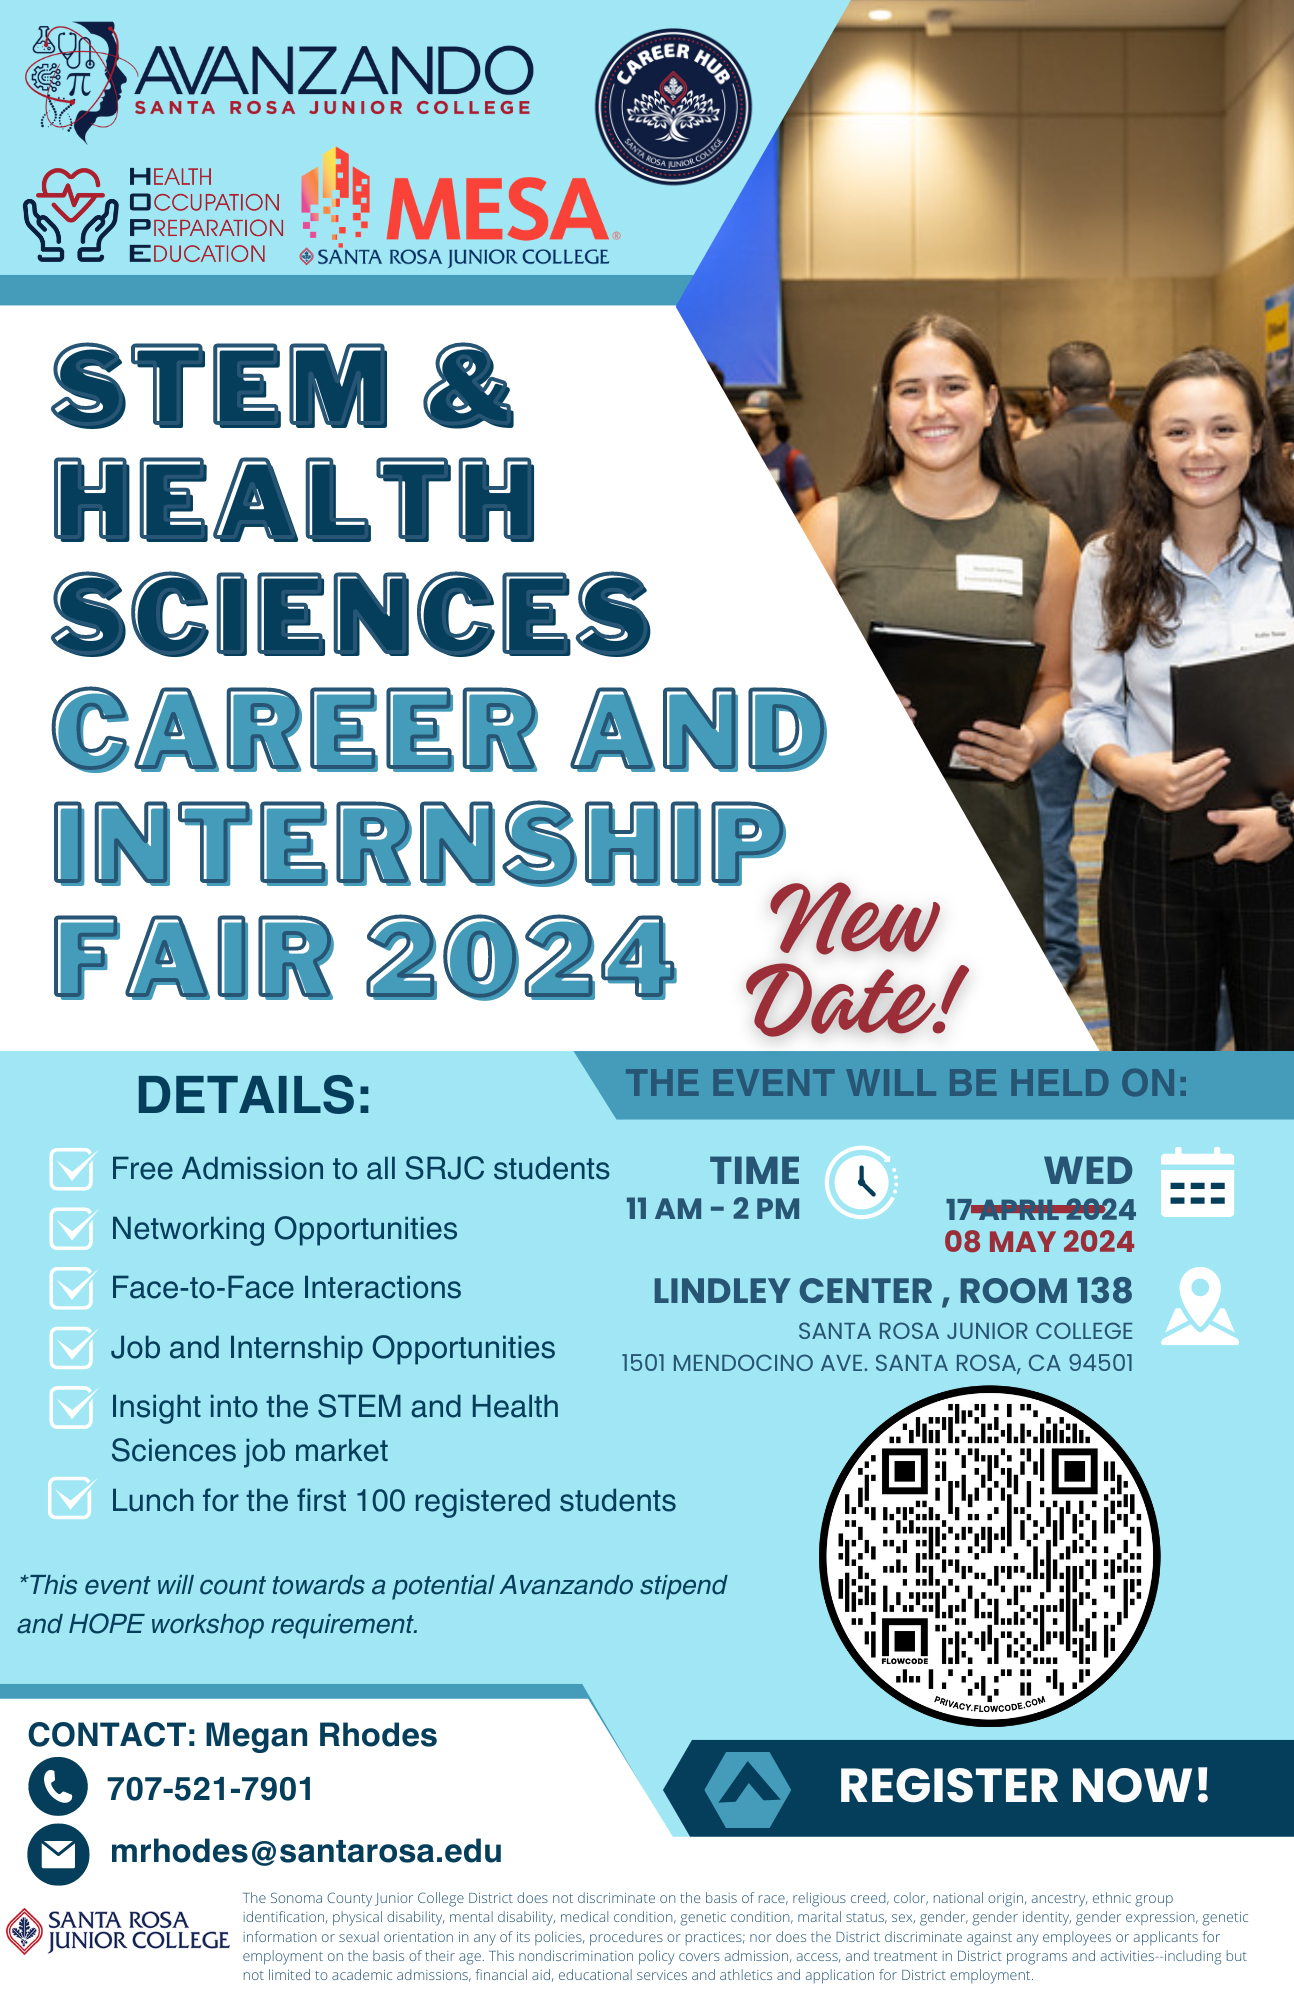 Blue and white poster for the April 17th STEM and Health Sciences Career and Internships Fair. Free Admission to all SRJC students. Networking Opportunities. Face-to-face interactions. Lunch for the first 100 registered students. 11-2pm. Wednesday April 17th. Lindley Center for STEM Education at Santa Rosa Junior College